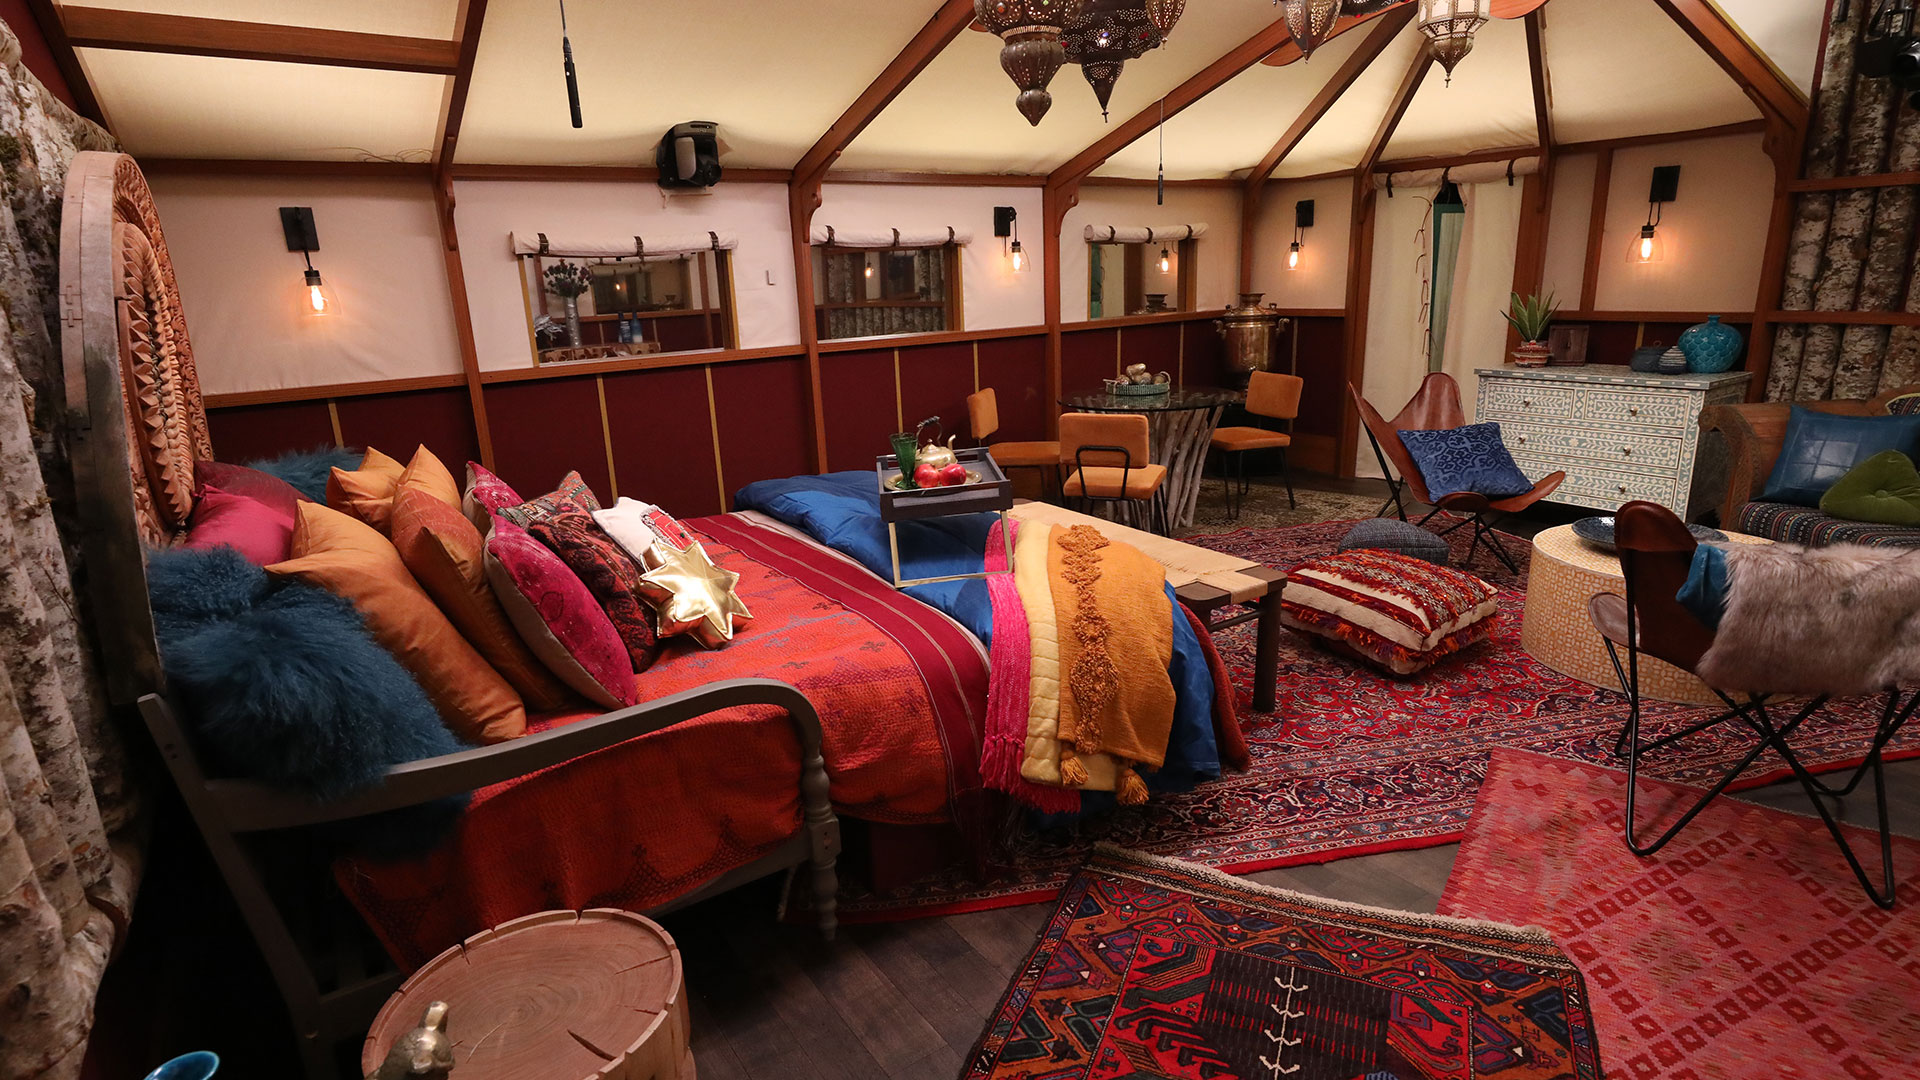 The HOH room is the definition of glamping